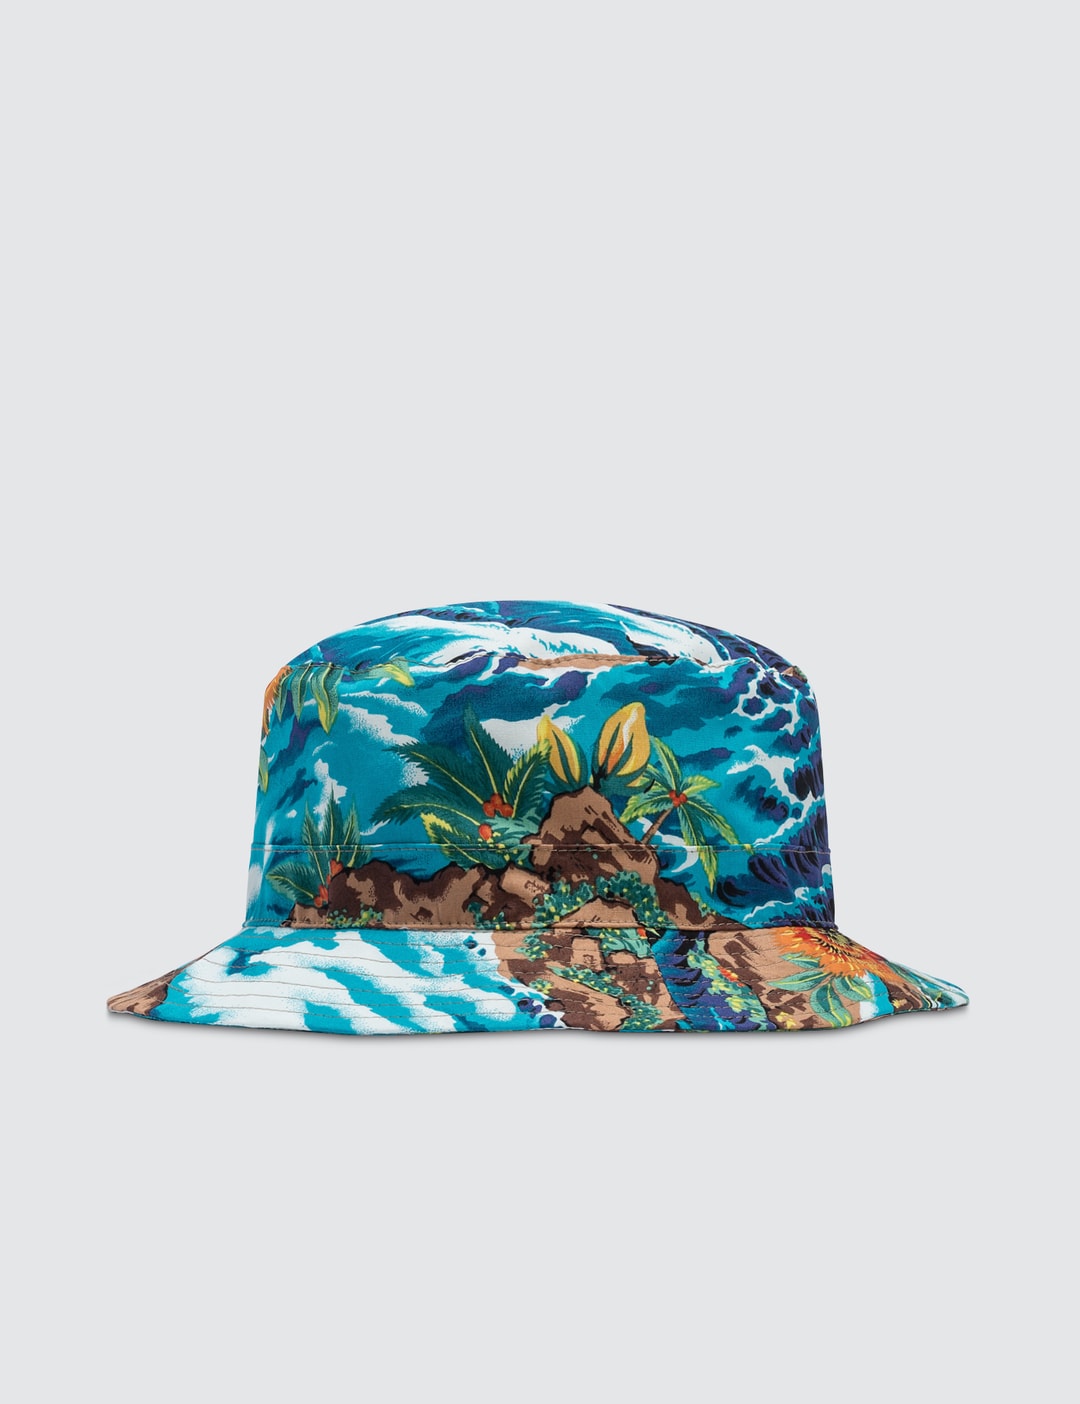 R13 - Bucket Hat | HBX - Globally Curated Fashion and Lifestyle by ...